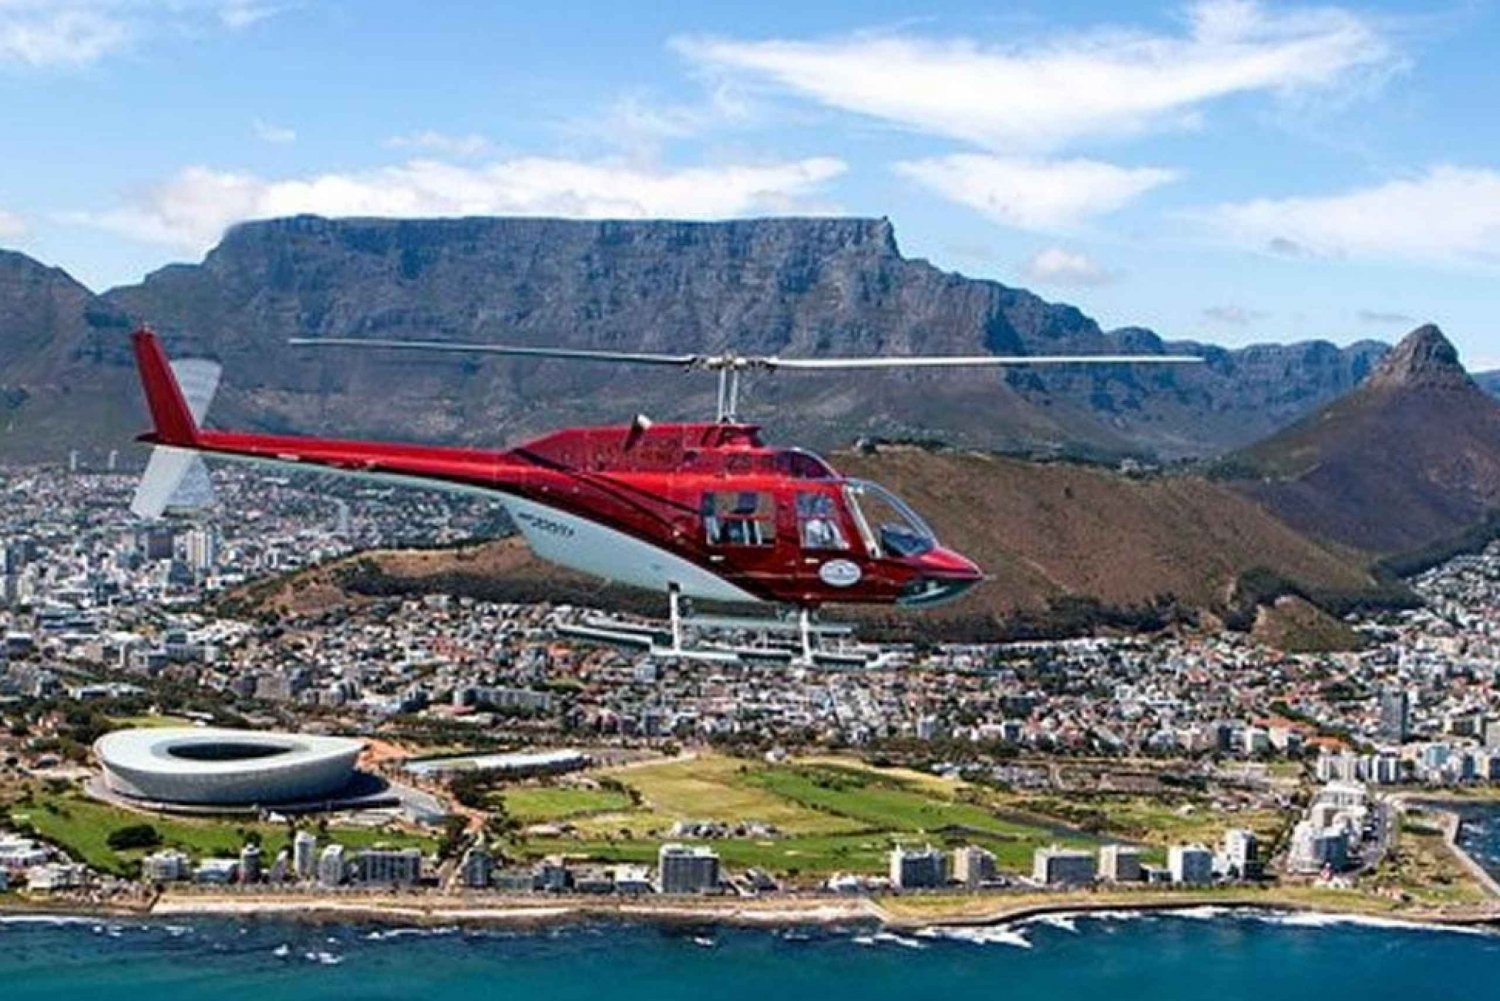 Cape Town Two Oceans Scenic Helicopter flight Dagsture